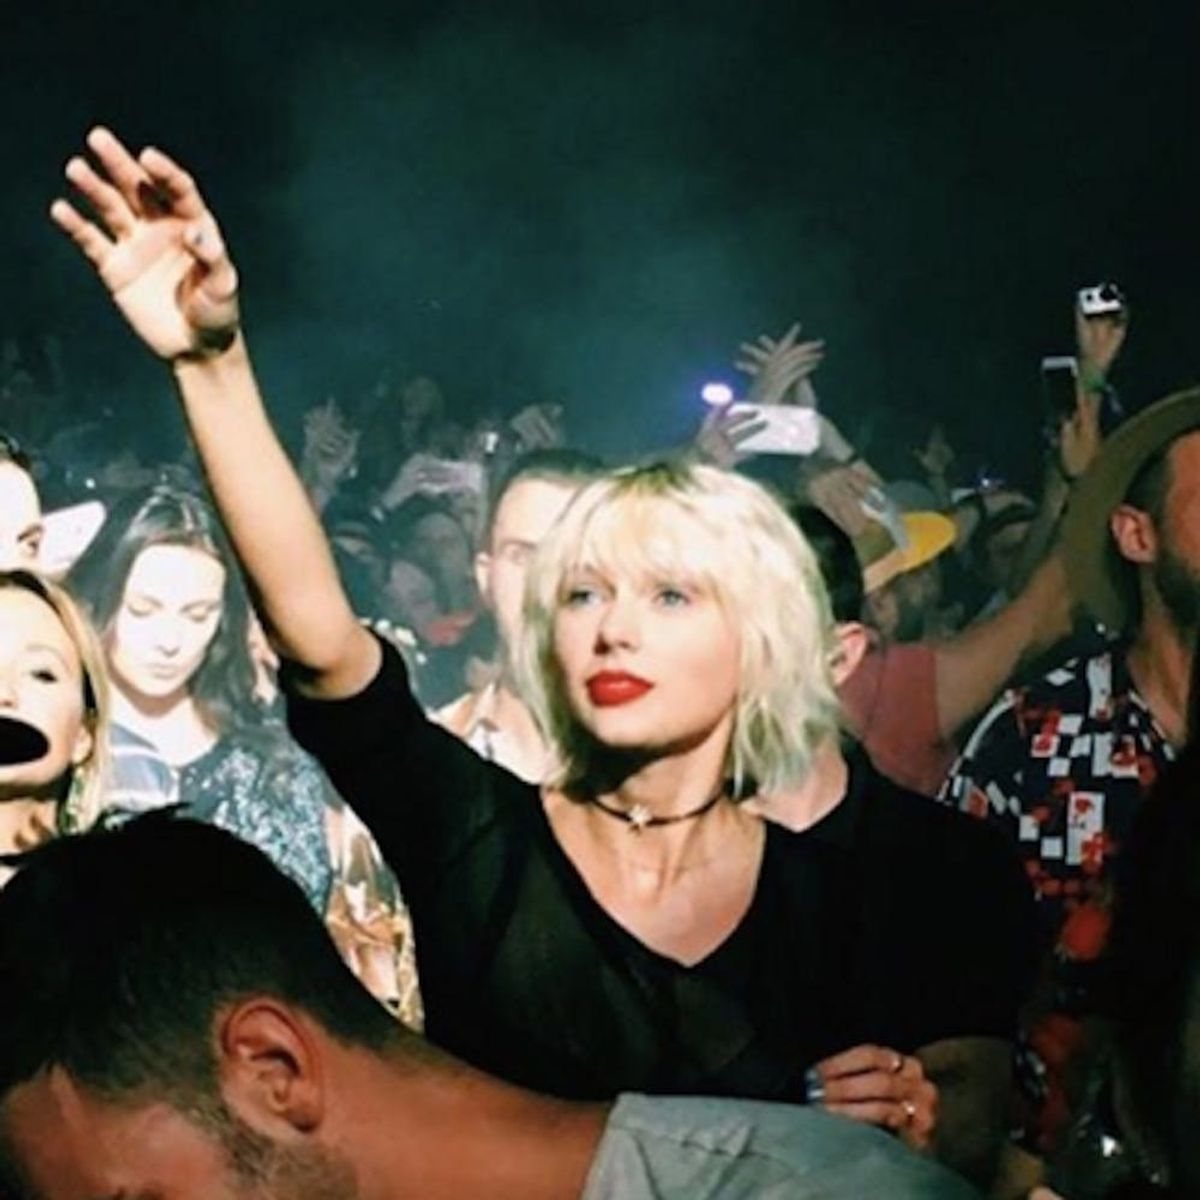 Morning Buzz! Taylor Swift Is the IRL Heart Eyes Emoji in This Hilarious Pic + More